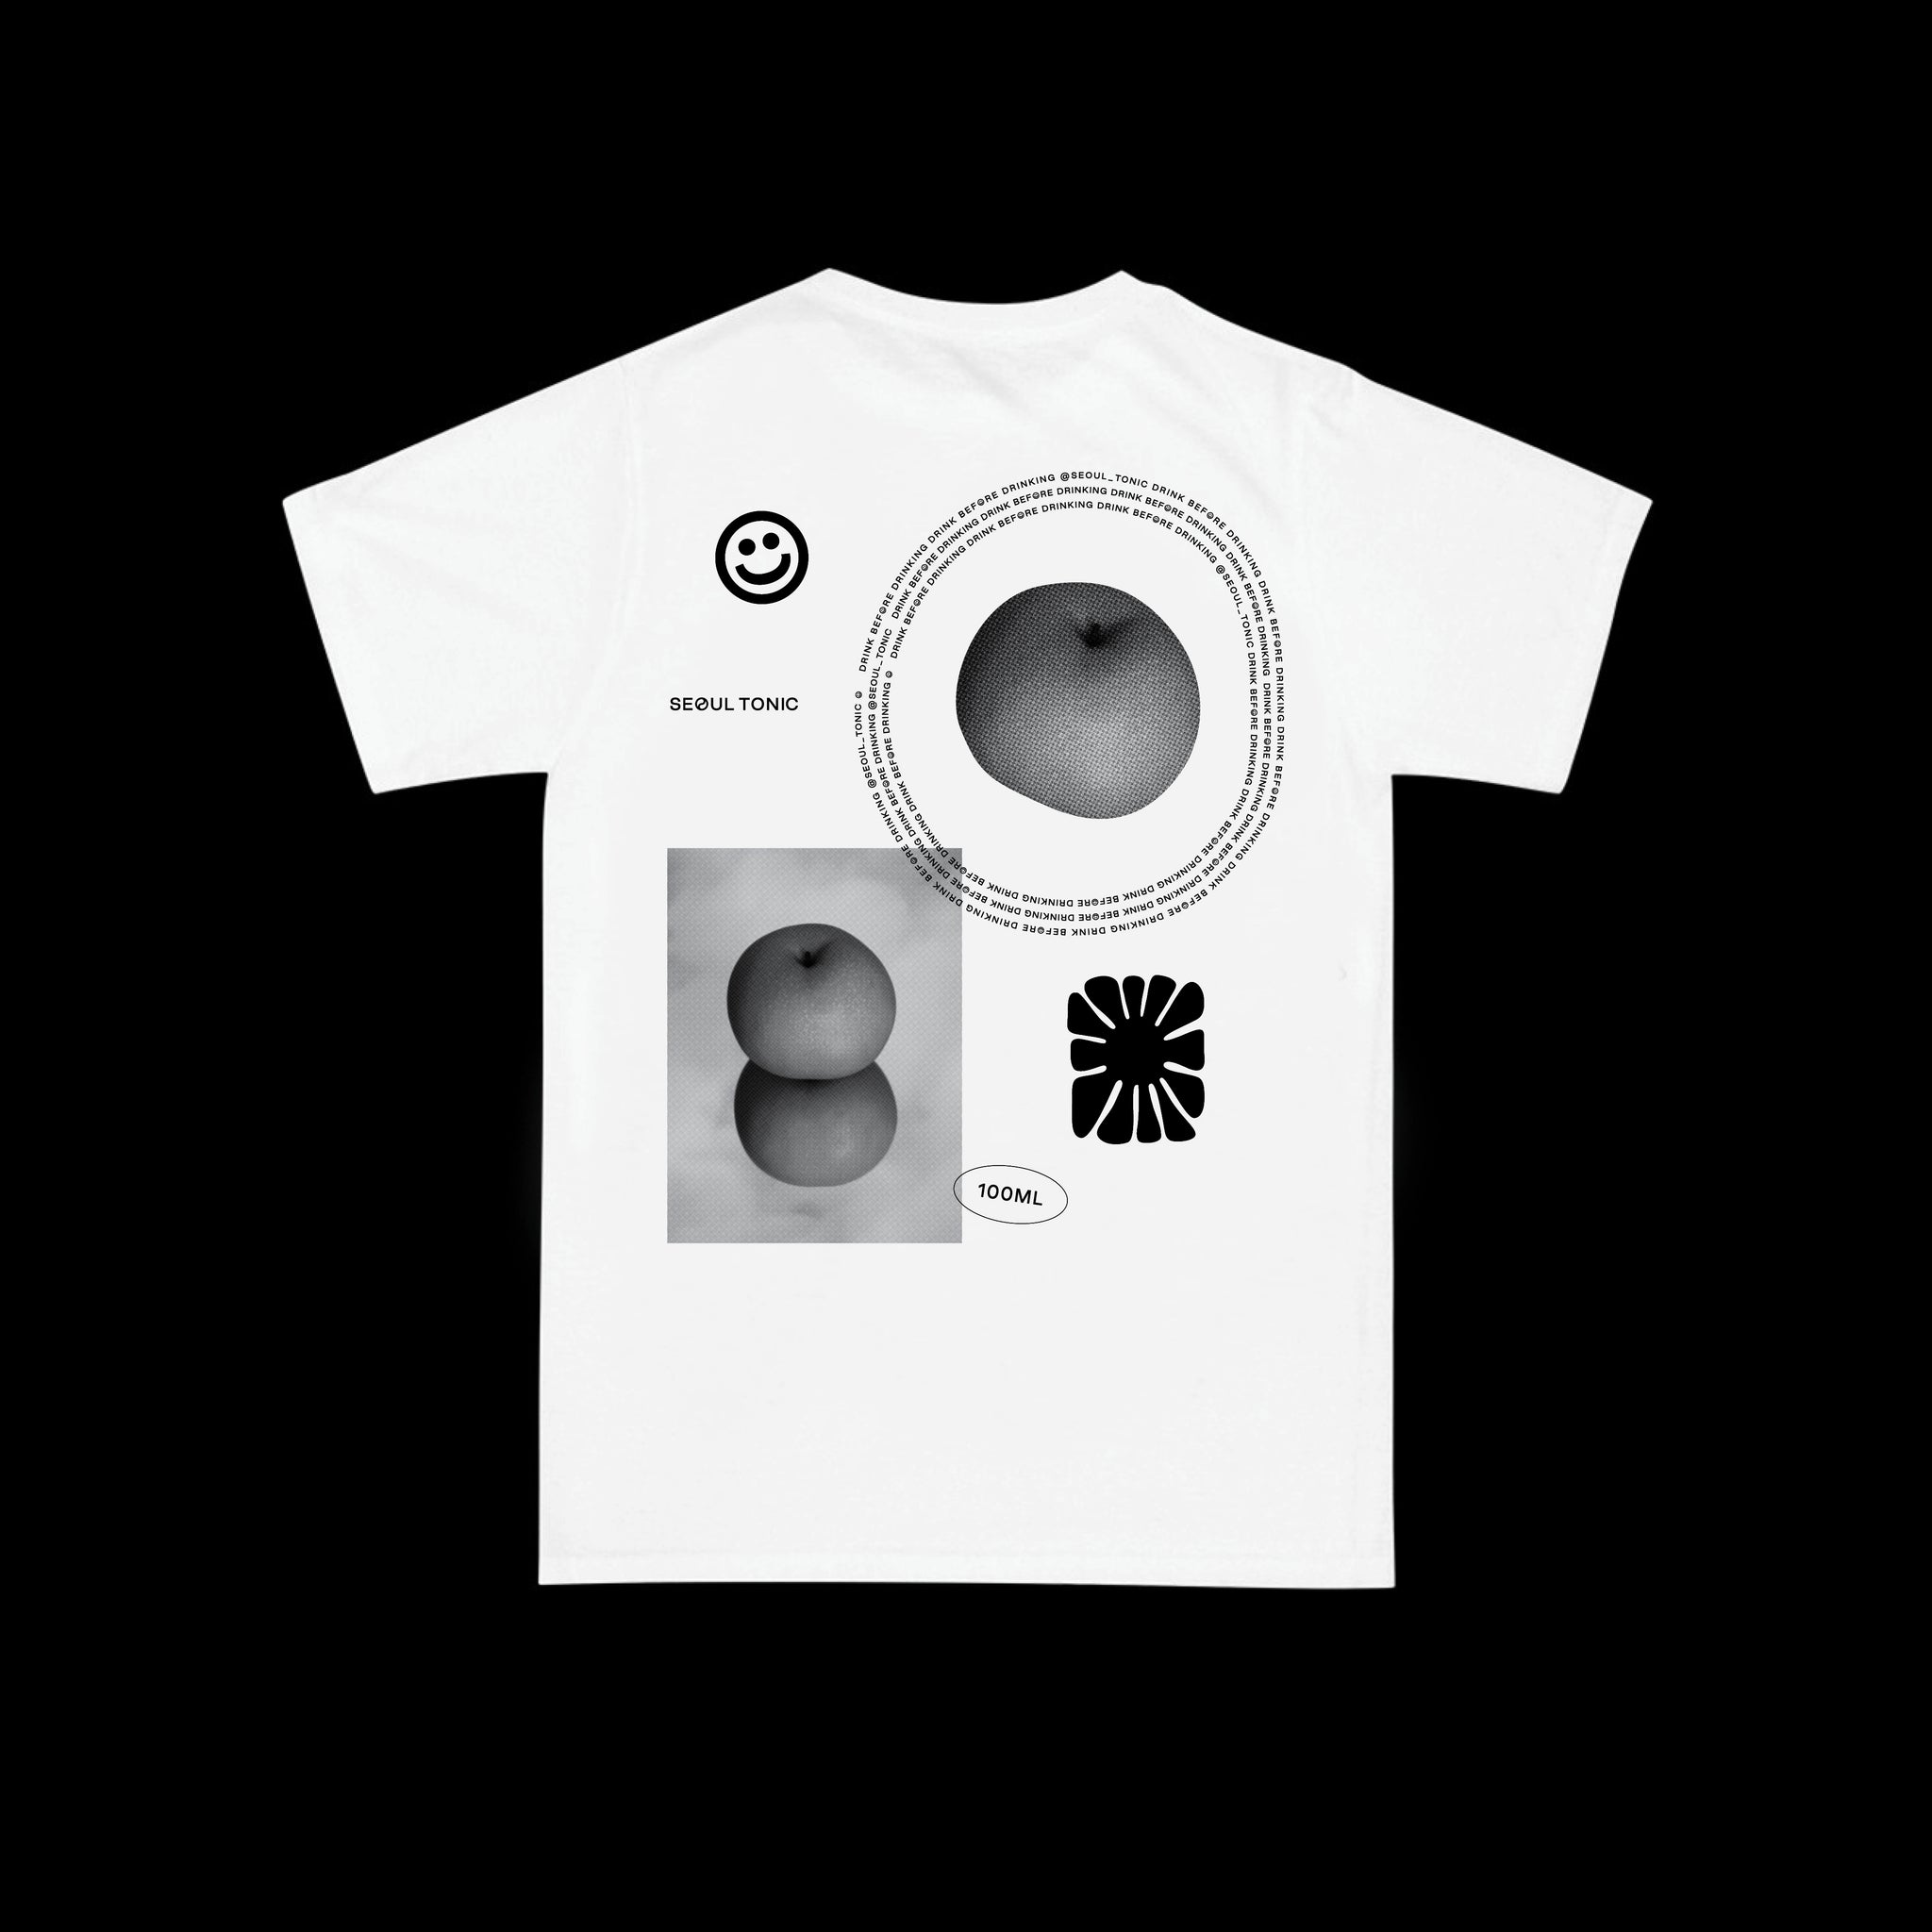 Seoul Tonic - Scattered Tee